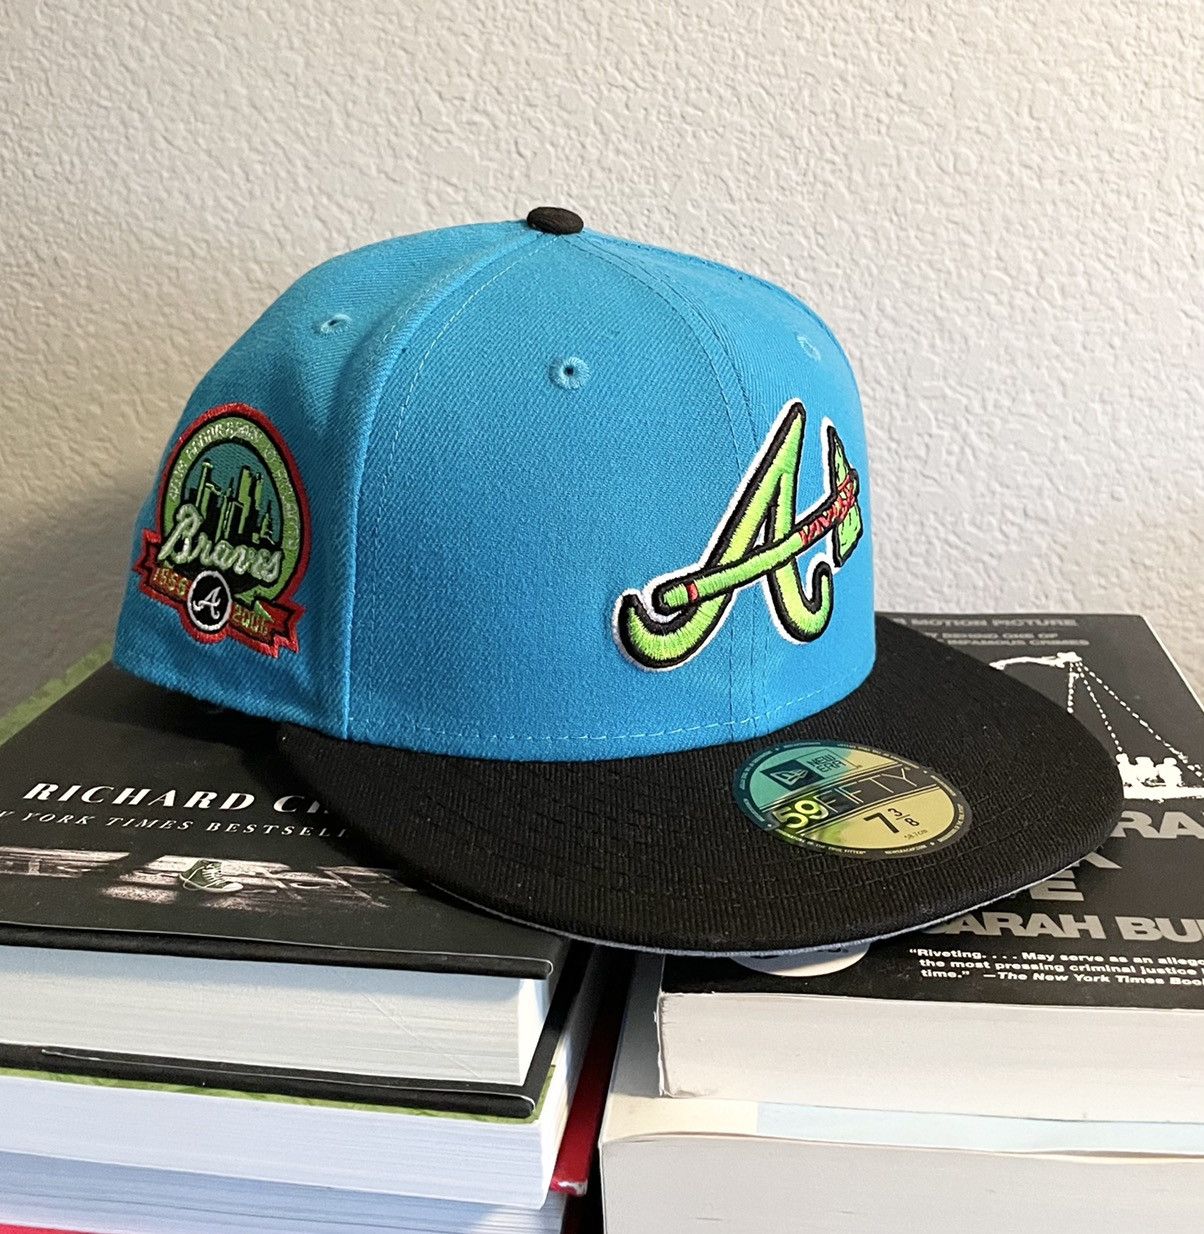 ATLiens @outkast 🛸 AUX Pack from @hatclub Atlanta Braves ATLiens 👽  Available in a size 7 1/4 for $65 (Pin Included!) 📦💨 Link in Bio to…